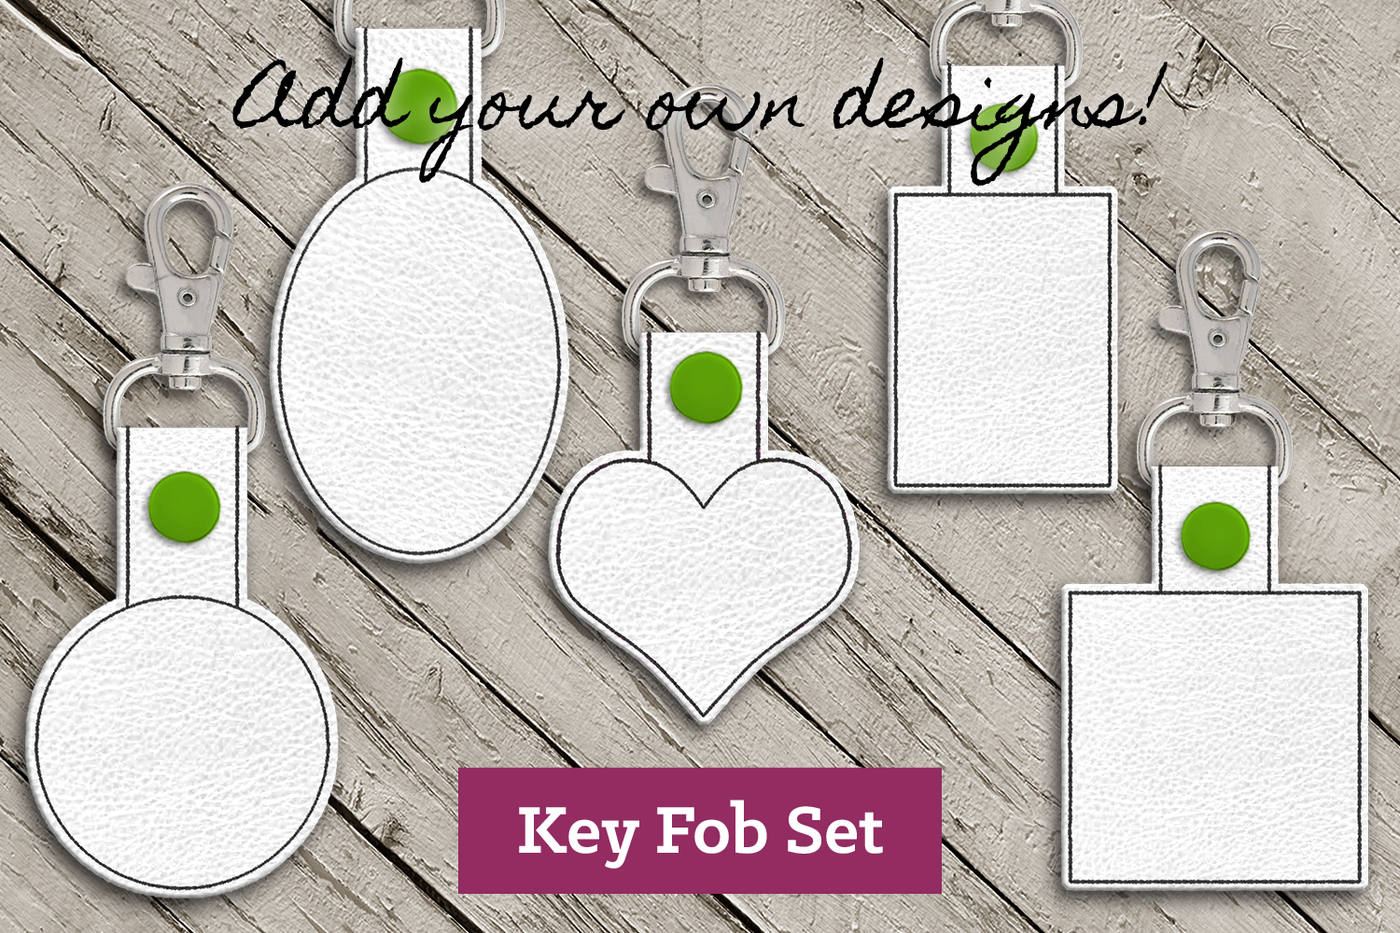 Set of 5 blank key fob ITH designs. Add your own designs to the center. Shows a circle, oval, heart, rectangle, and square key fob.